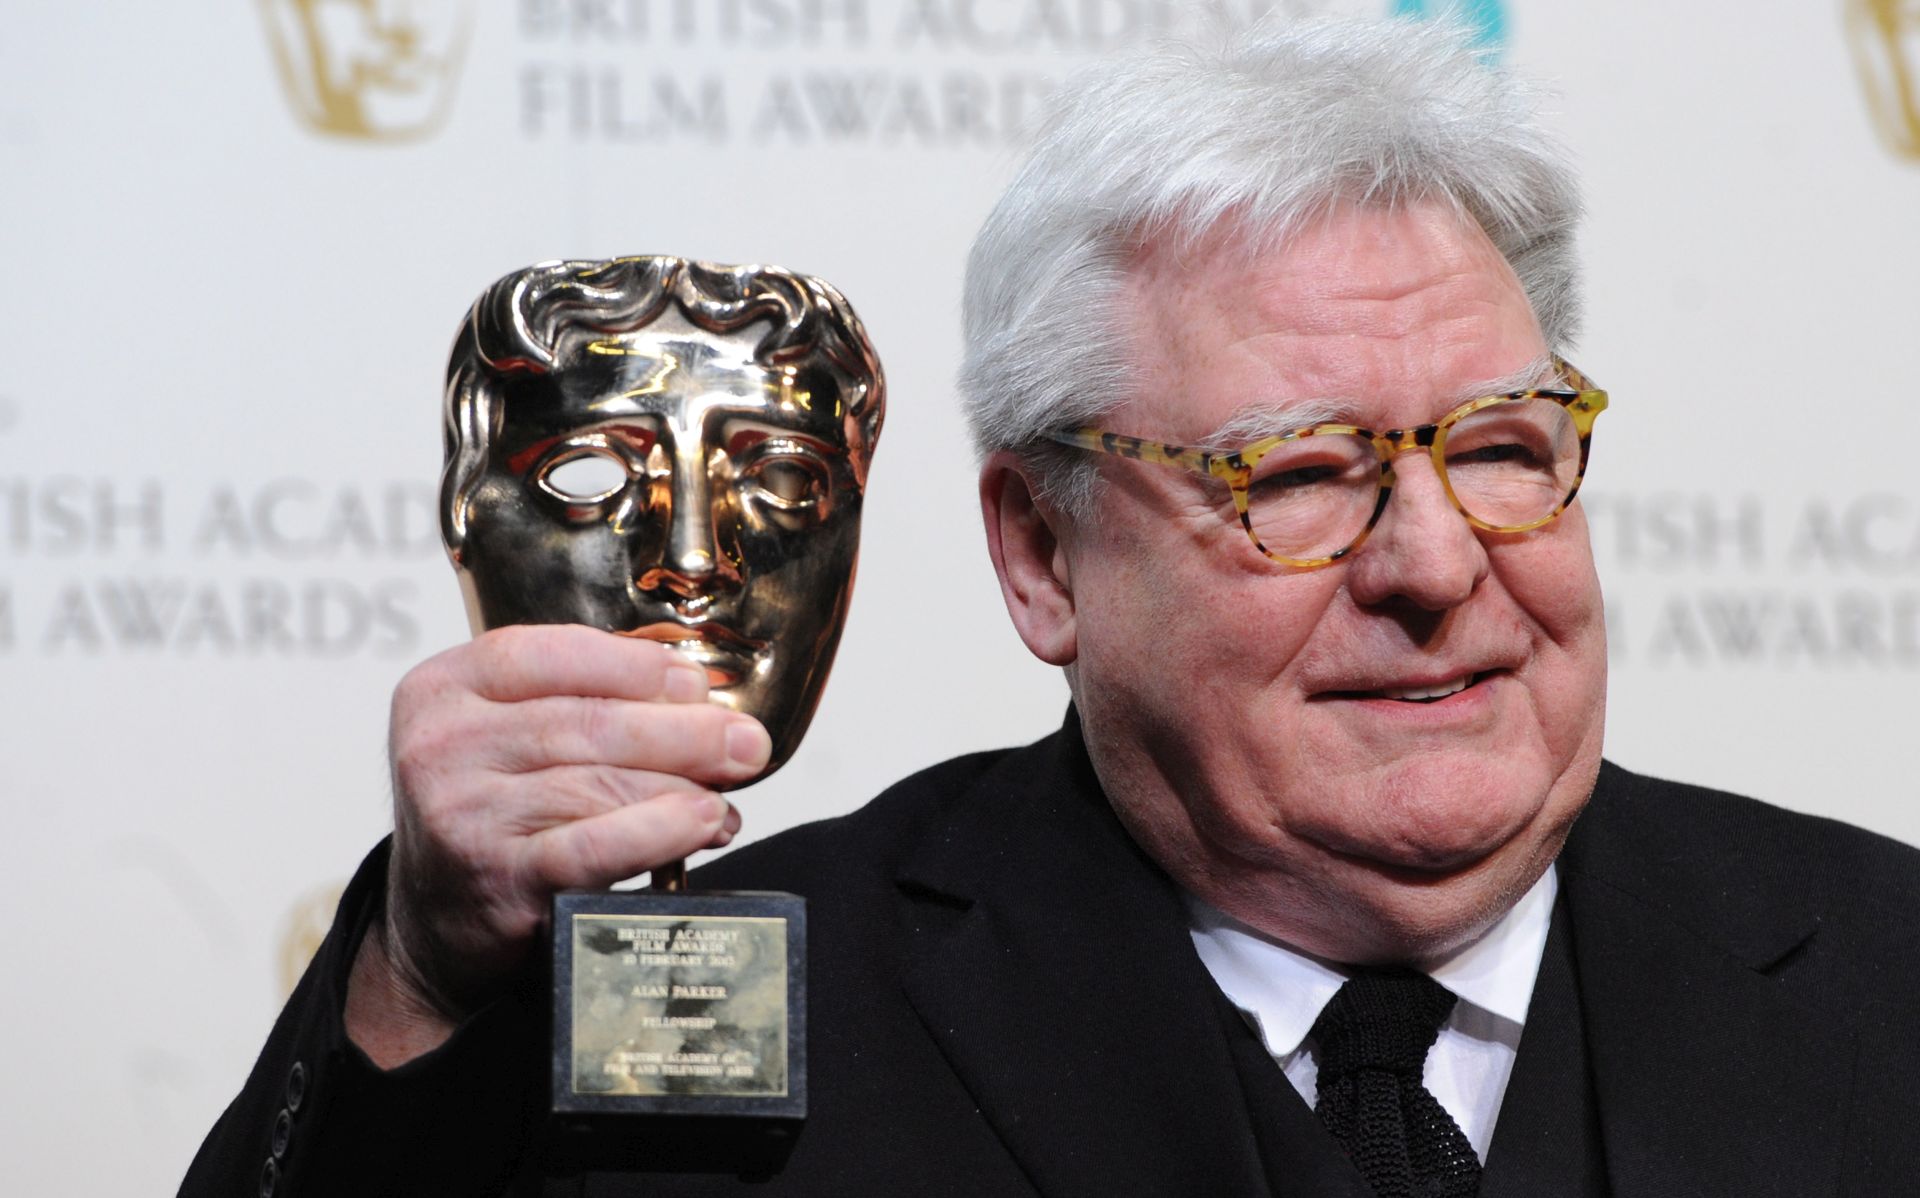 epa08577559 (FILE) - epa03577866 British film director Sir Alan William Parker poses in the Press Room after winning Bafta fellowship award during the EE BAFTA's, British Academy Film Awards, in London, Britain, 10 February 2013 (reissued 31 July 2020). British director, producer and screenwriter, Sir Alan Parker has died on 31 July 2020 aged 76 after a long illness.  EPA/ANDY RAIN *** Local Caption *** 50704761